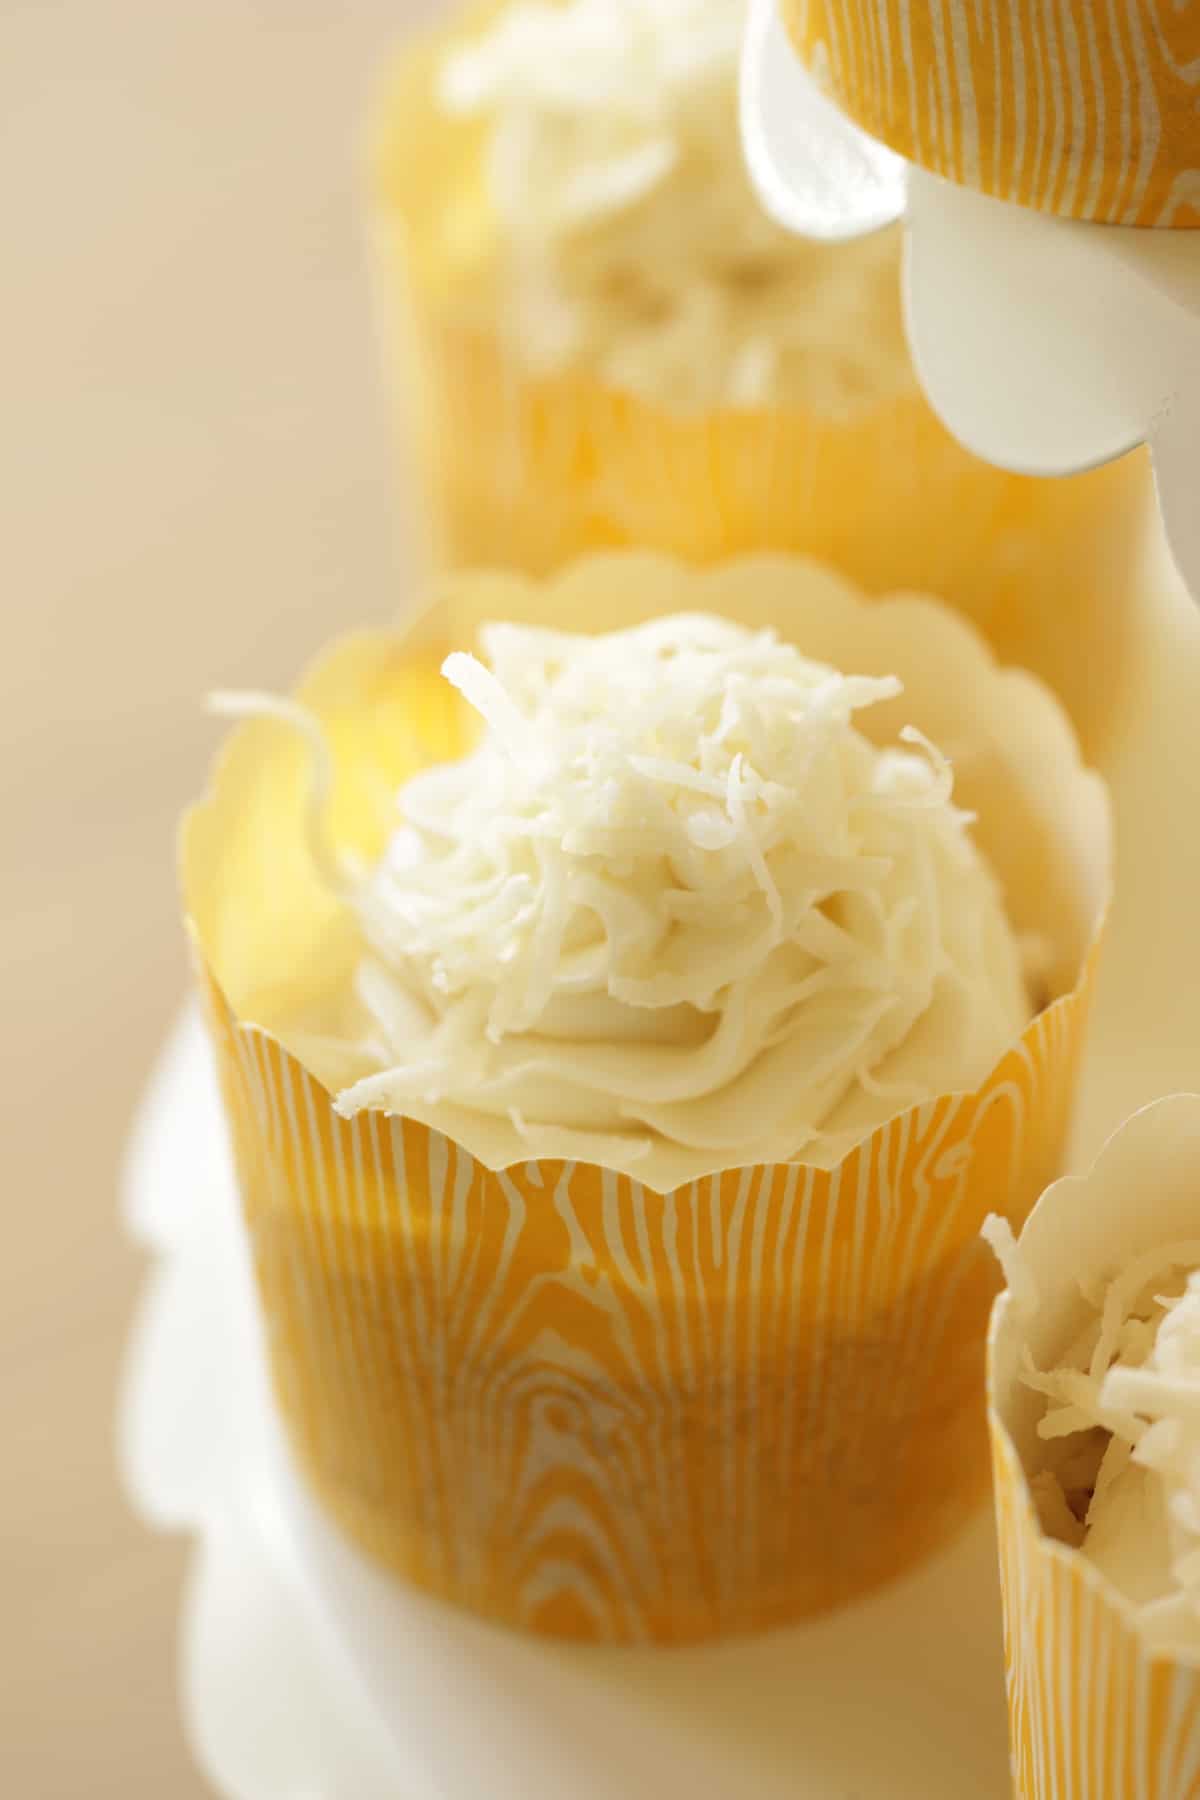 Coconut Cupcakes with vanilla frosting and shredded coconut on top